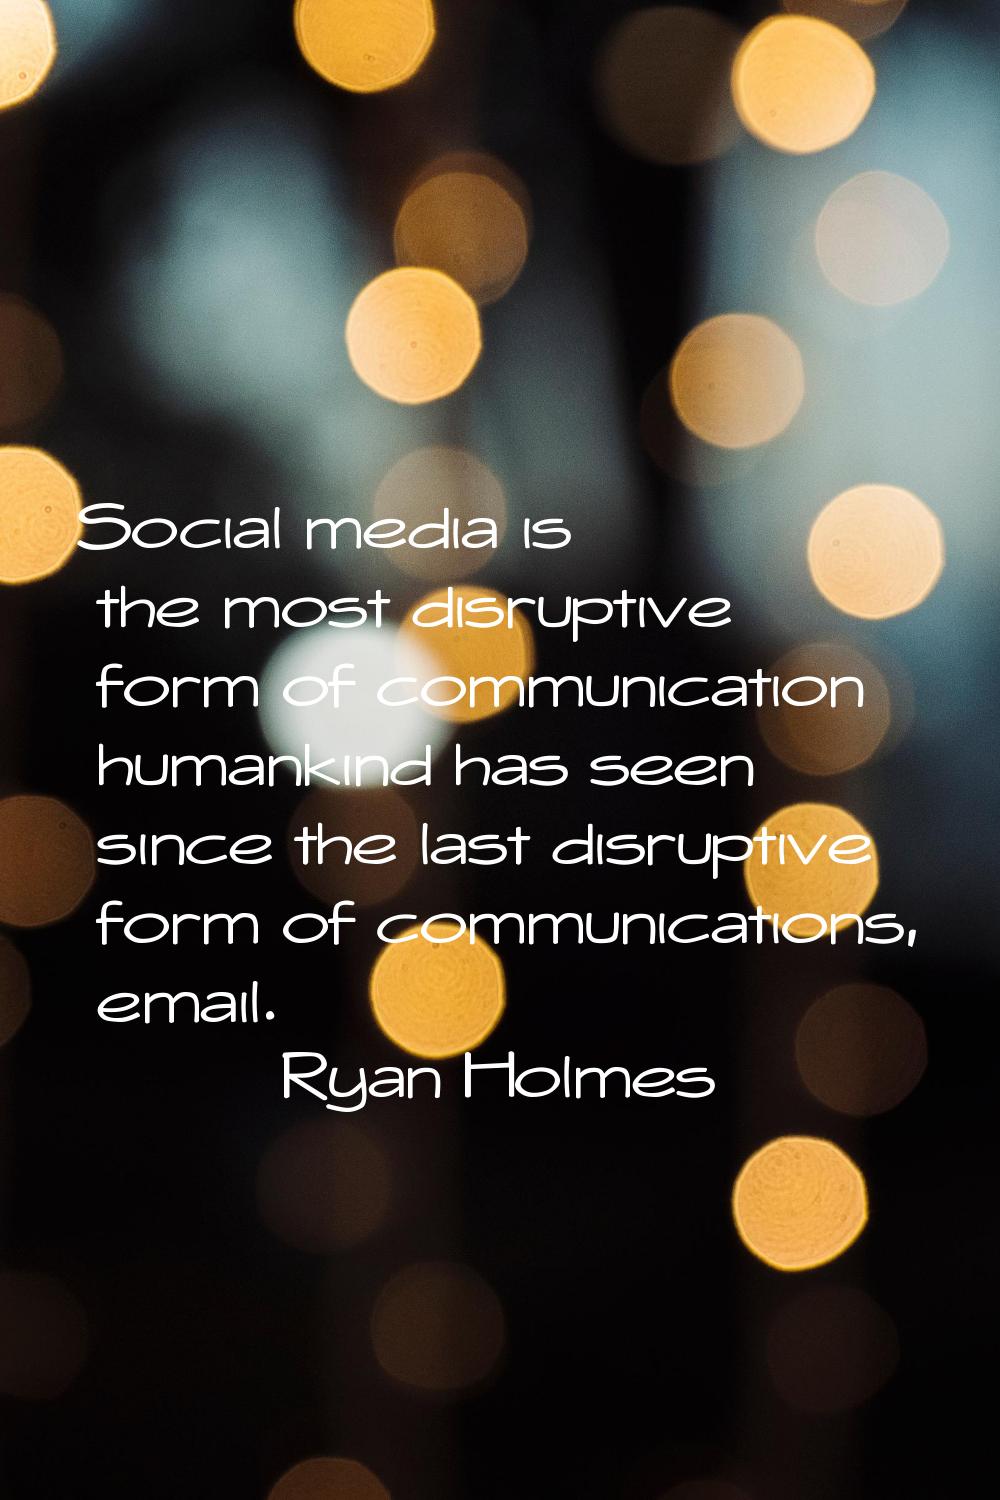 Social media is the most disruptive form of communication humankind has seen since the last disrupt